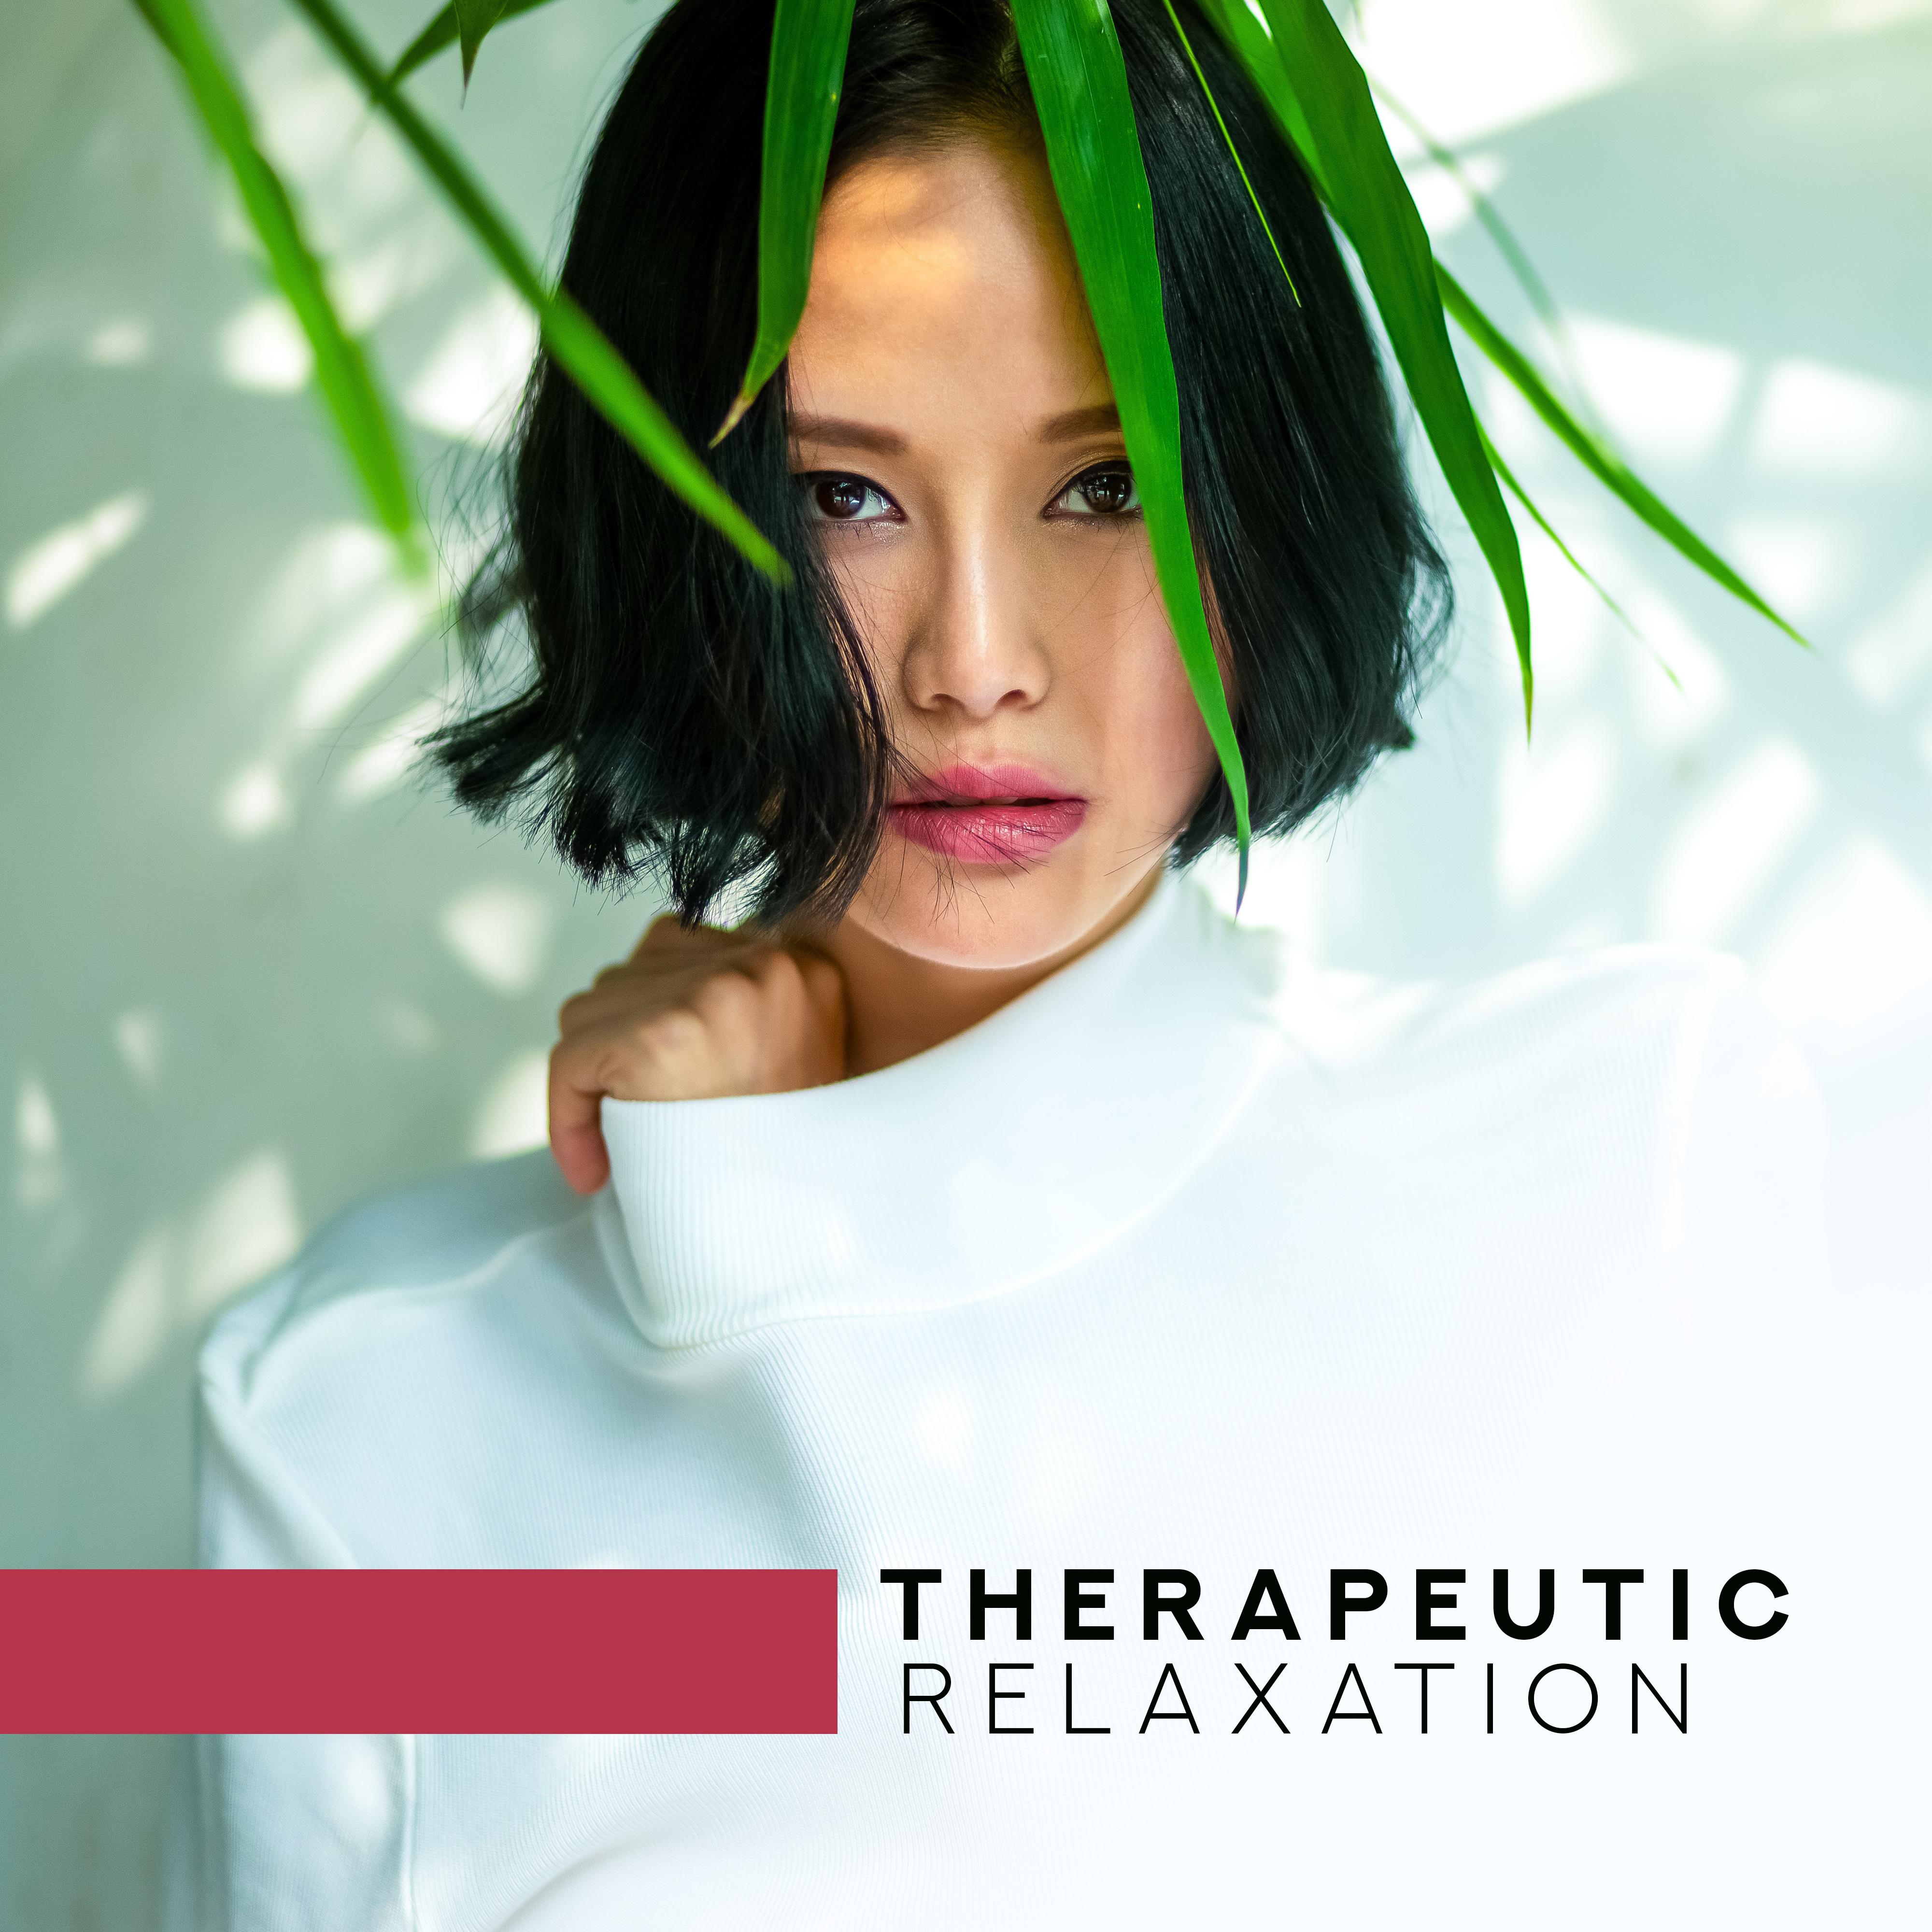 Therapeutic Relaxation – Soothing Sounds for Spa, Wellness, Sleep, Relax, Spa Zen, Pure Therapy, Nature Sounds to Calm Down